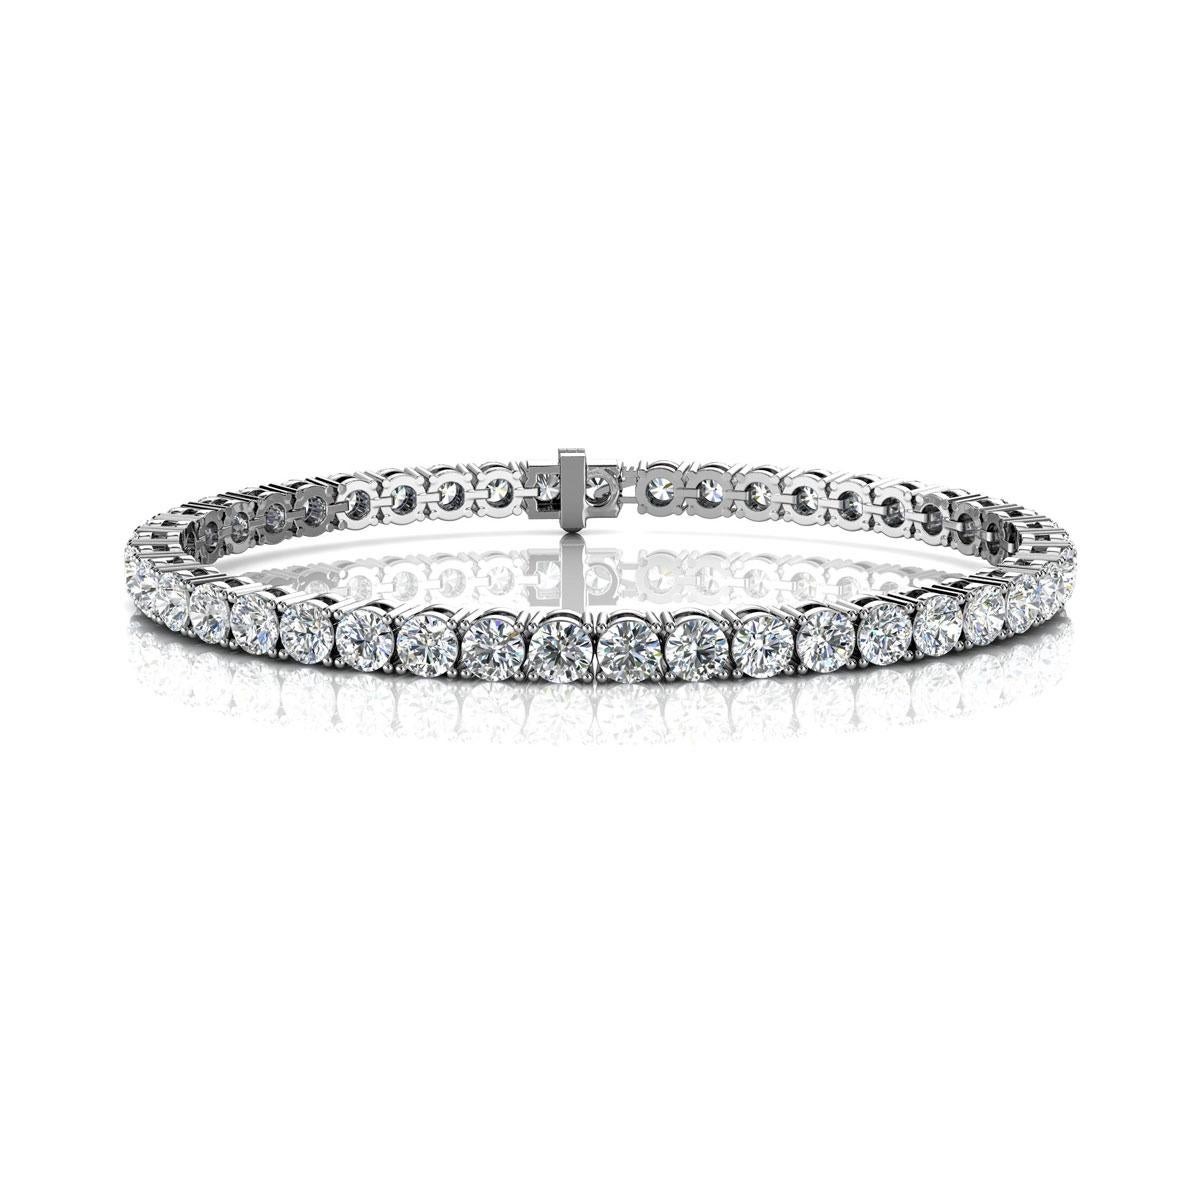 A timeless four prongs diamonds tennis bracelet. Experience the Difference!

Product details: 

Center Gemstone Type: NATURAL DIAMOND
Center Gemstone Color: WHITE
Center Gemstone Shape: ROUND
Center Diamond Carat Weight: 8
Metal: 14K White